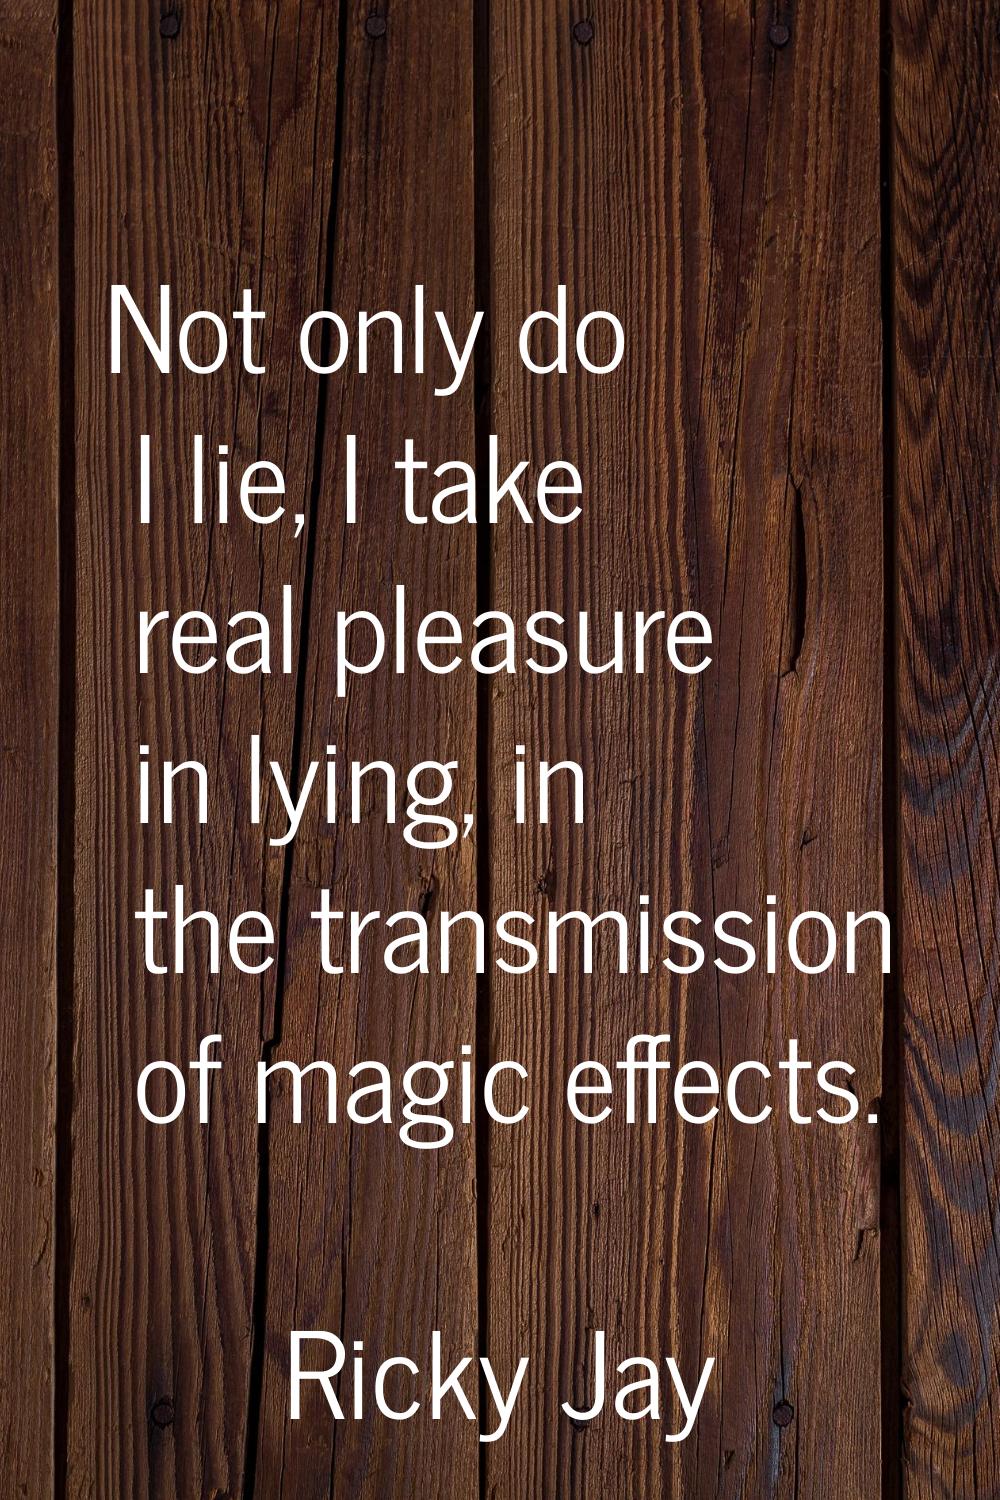 Not only do I lie, I take real pleasure in lying, in the transmission of magic effects.